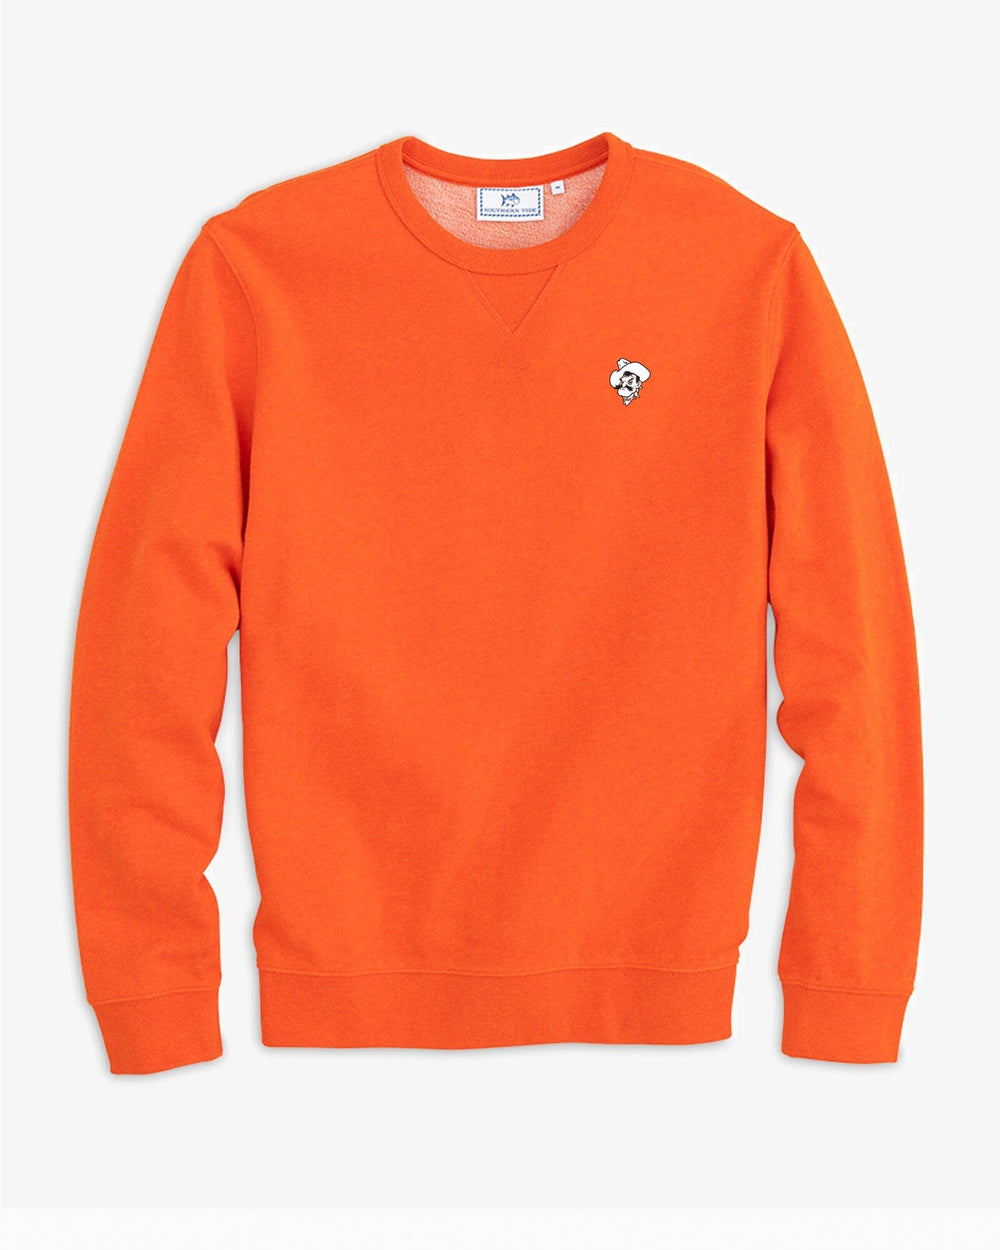 The front view of the Oklahoma State Cowboys Upper Deck Pullover Sweatshirt by Southern Tide - Heather Endzone Orange